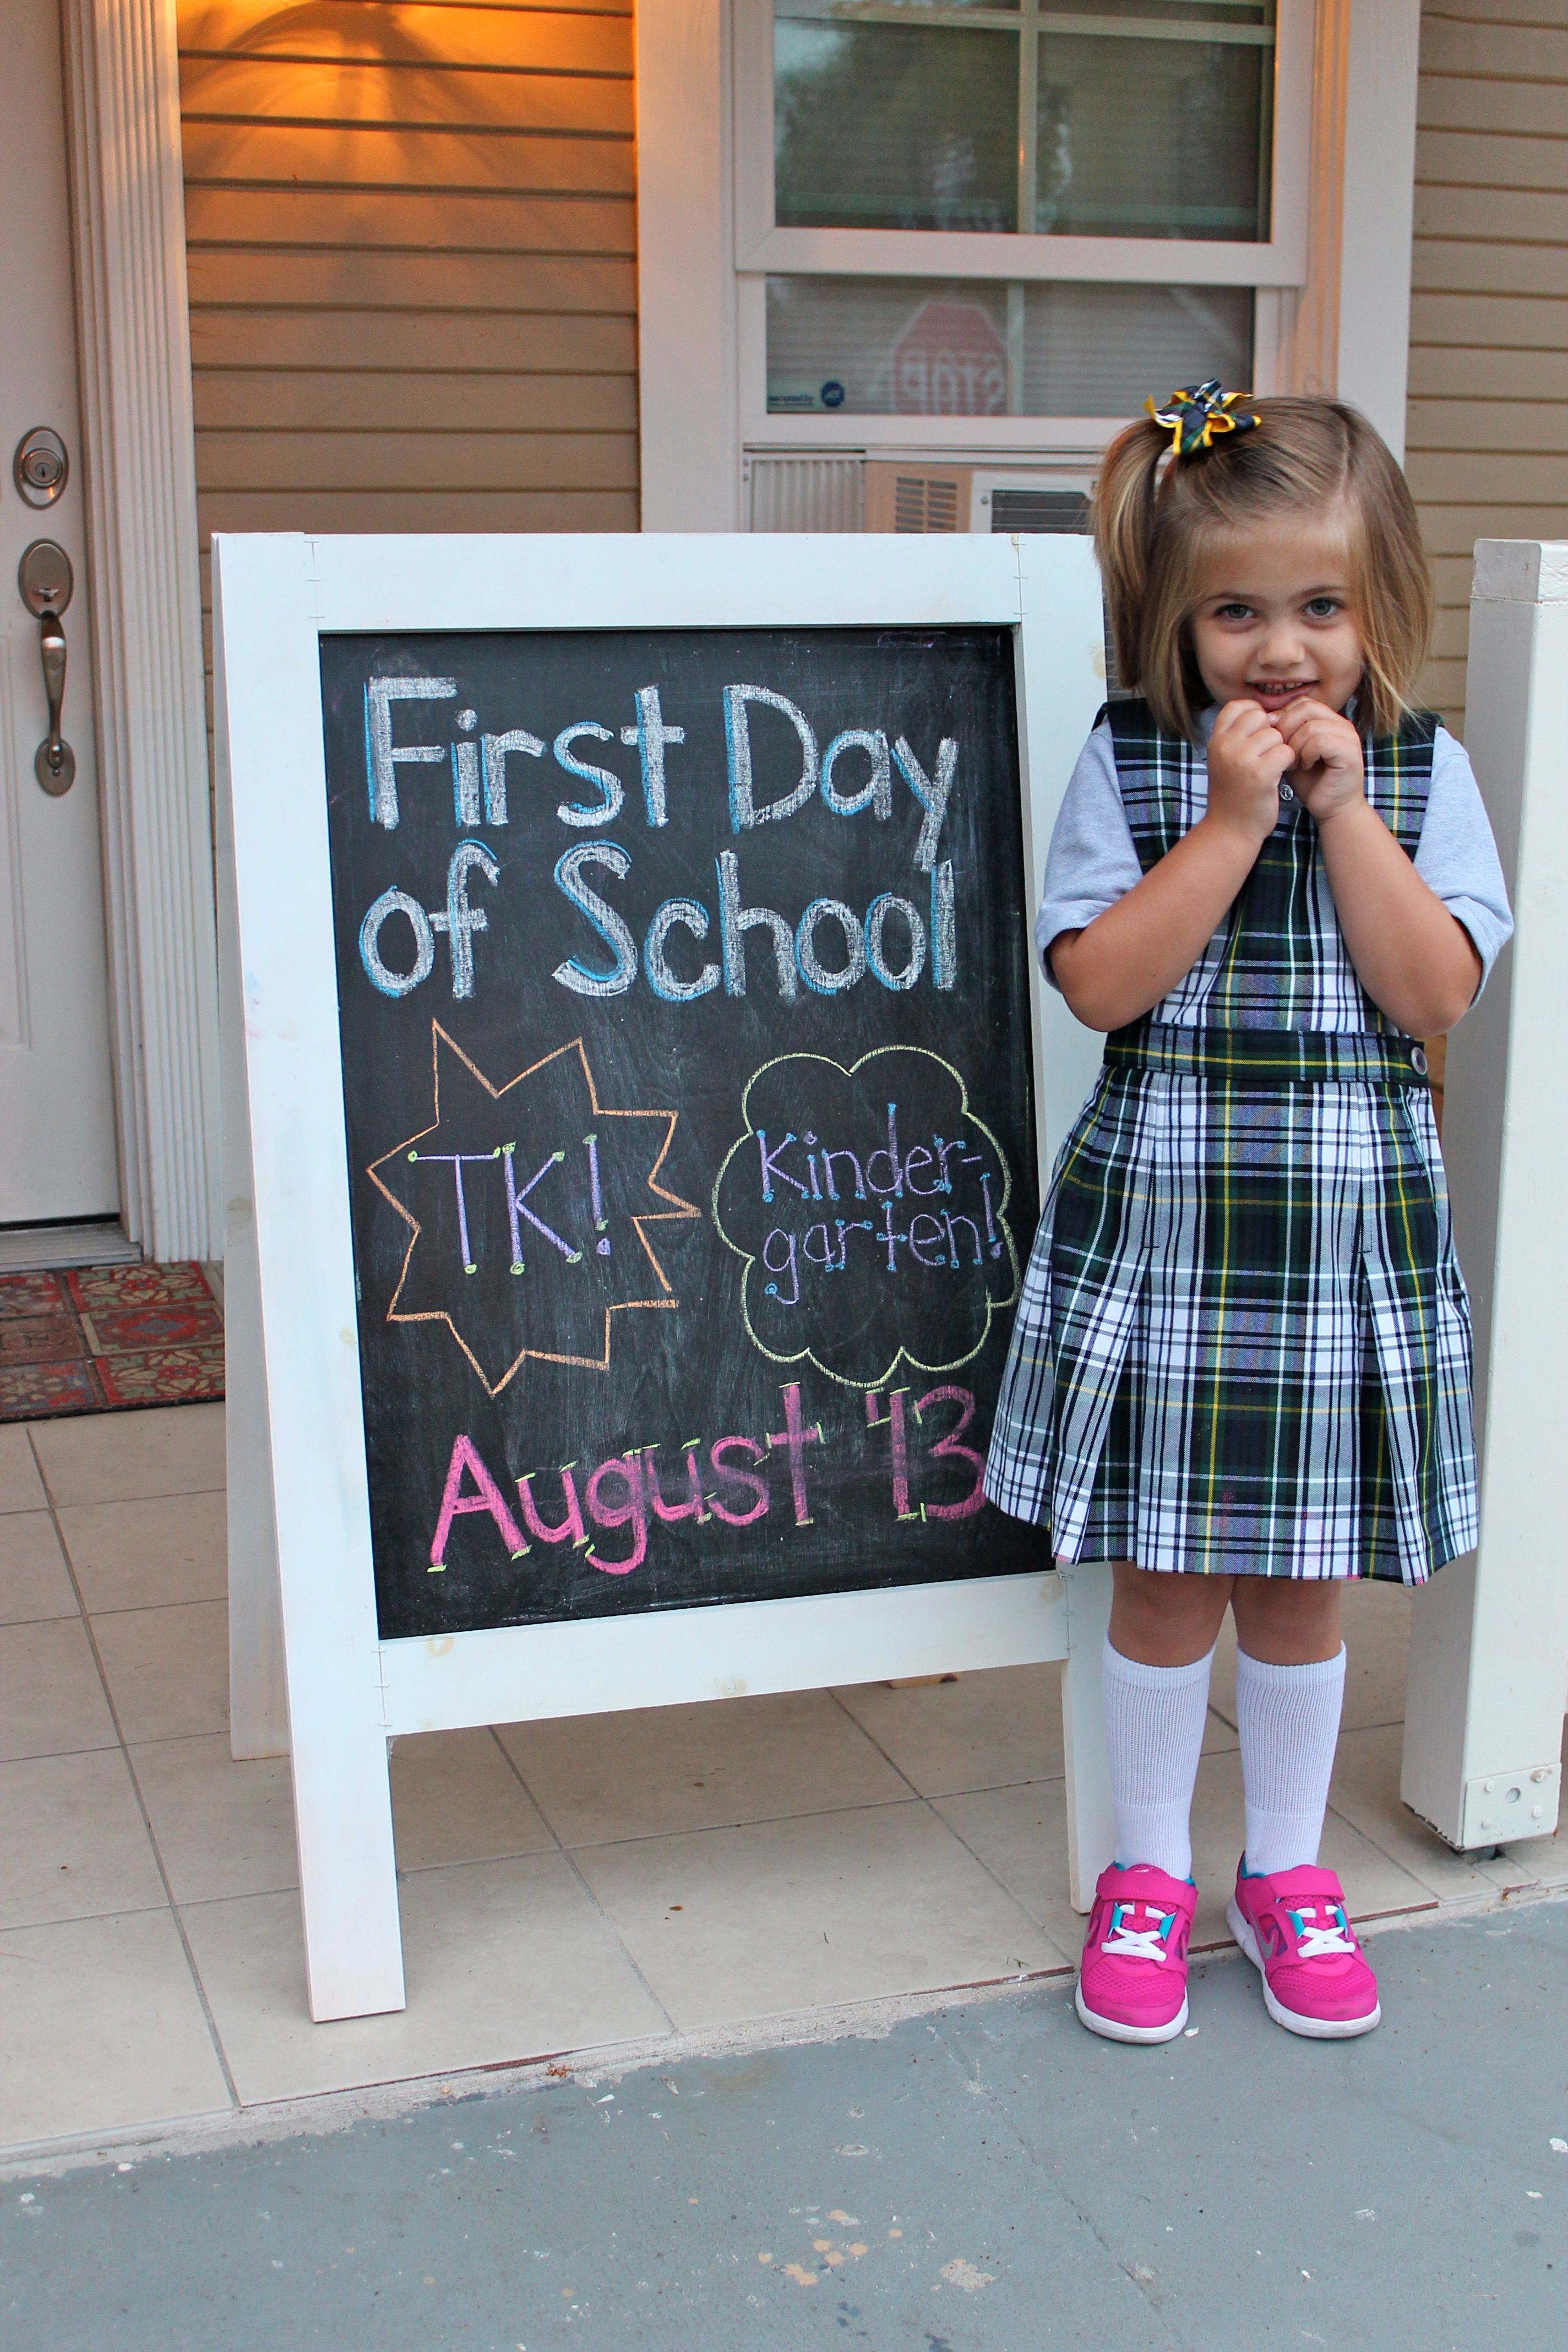 She school this year. First Day of School. First Day in School. 1st Day of School. First Day of School 5 класс.